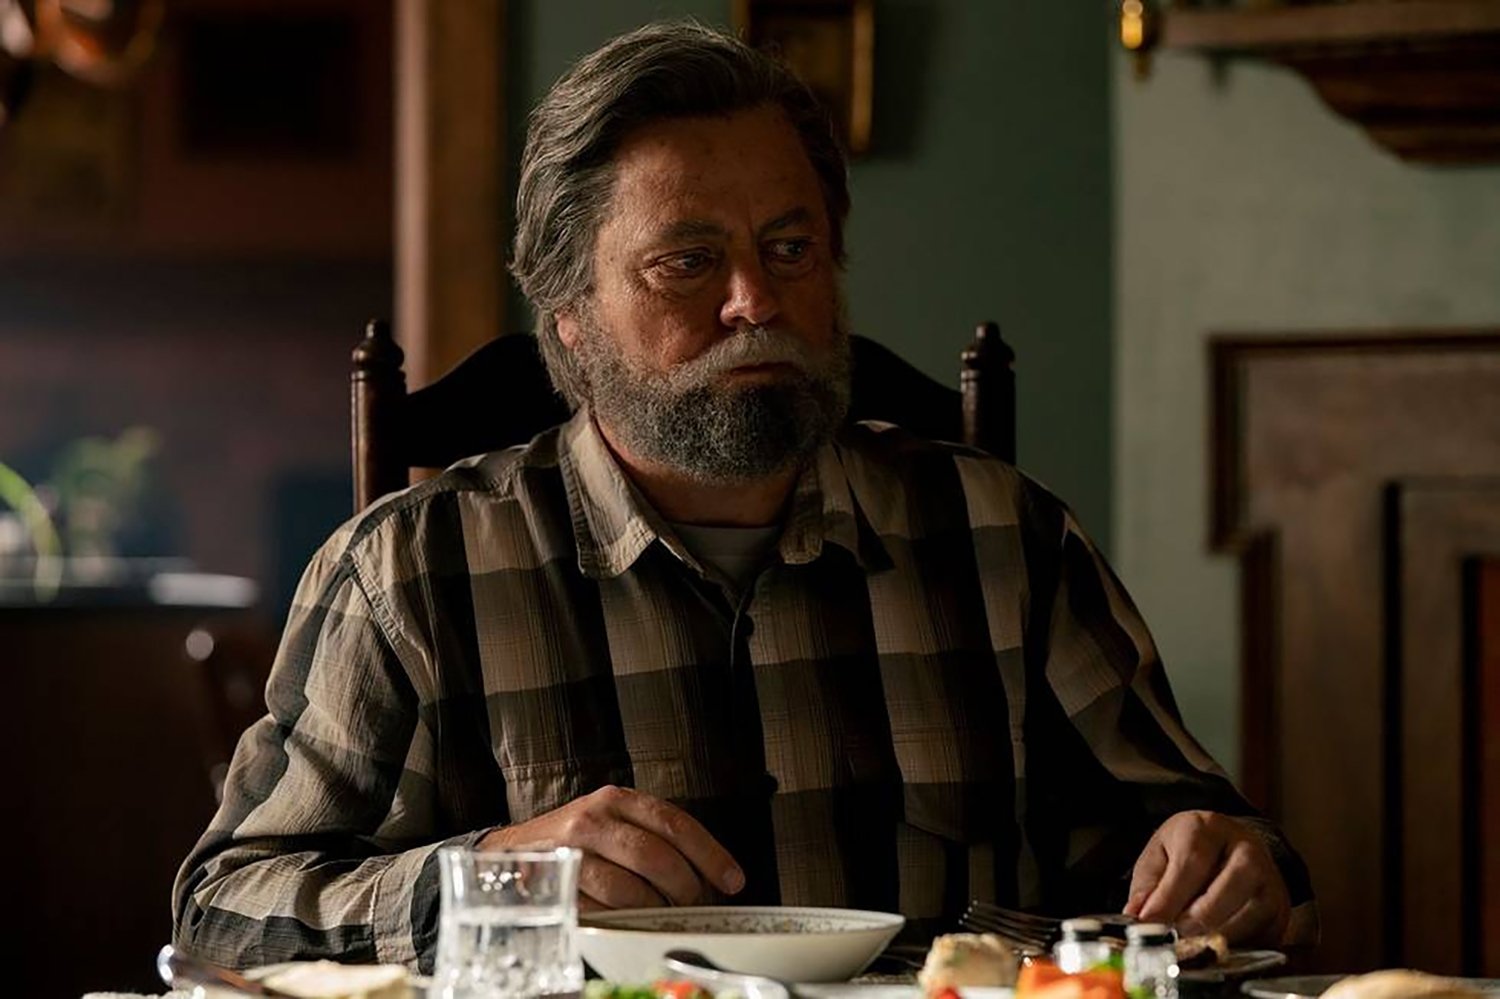 Nick Offerman as Bill sitting at a dining table in The Last of Us Episode 3.